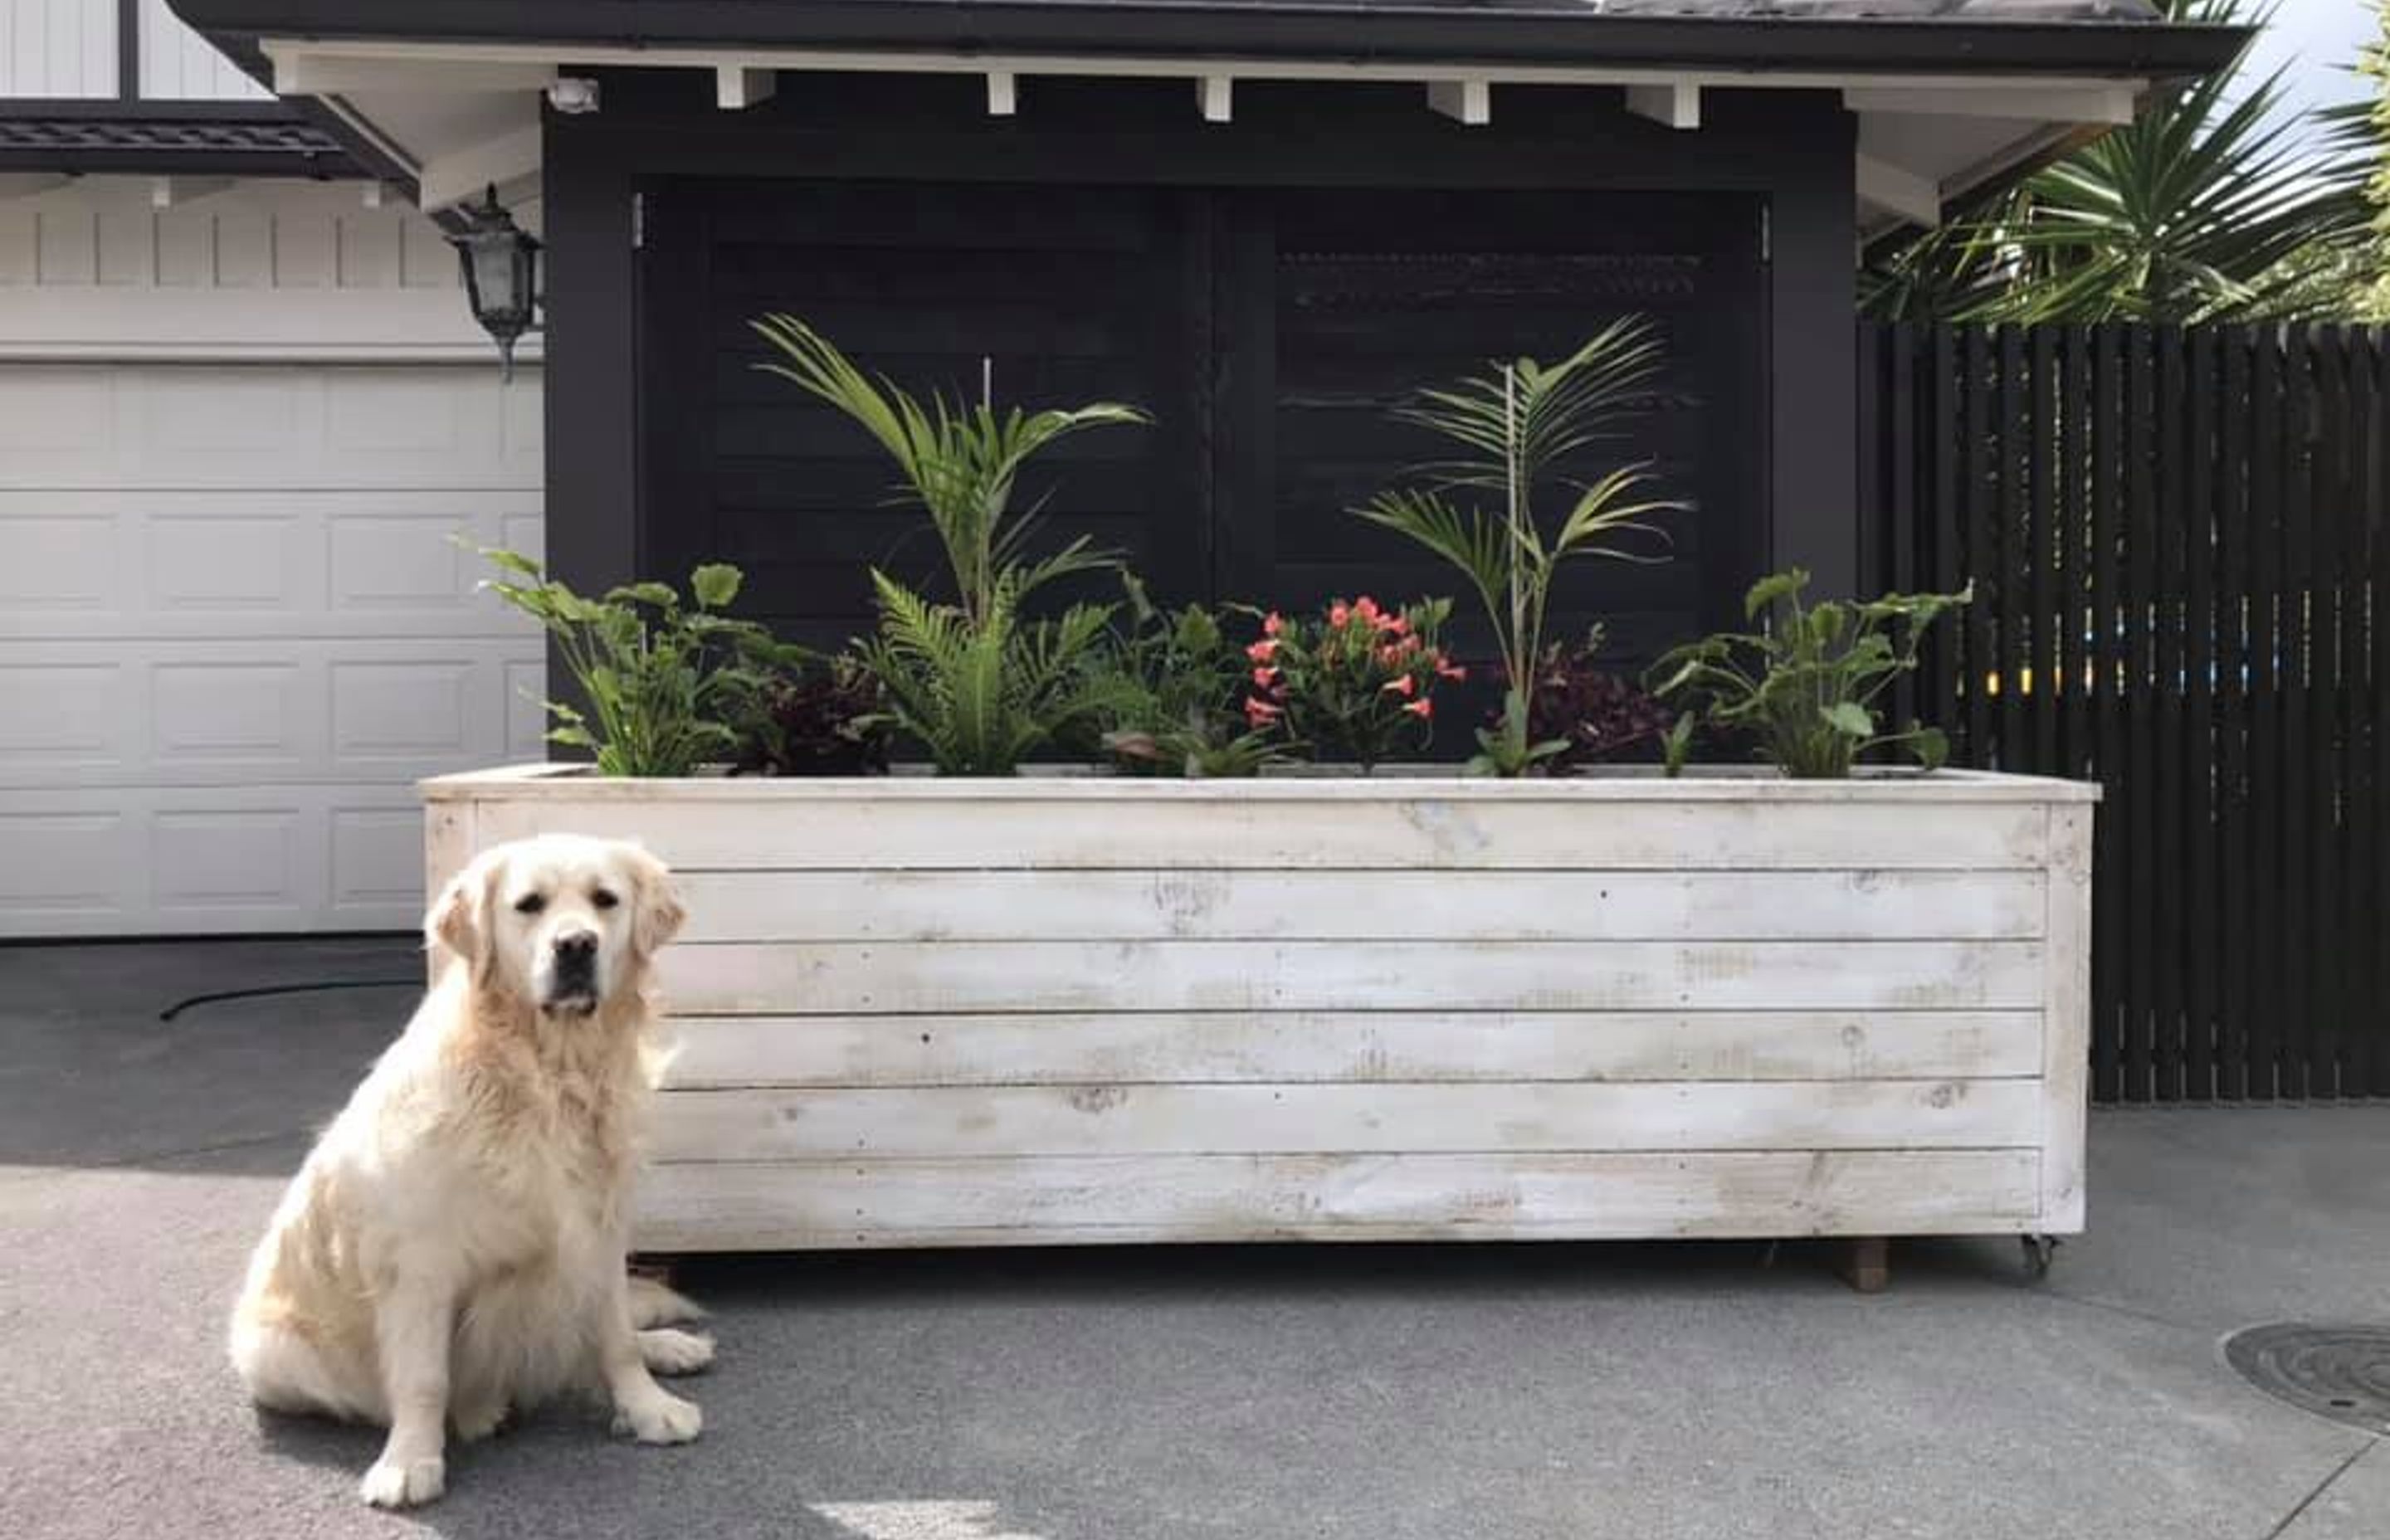 Byron Bay Box - this box is constructed using white washed rough sawn pine and is a more rustic and cost effective option. It is planted with typical plants found in byron bay such as the bangalow palm and philodendron Xanadu.